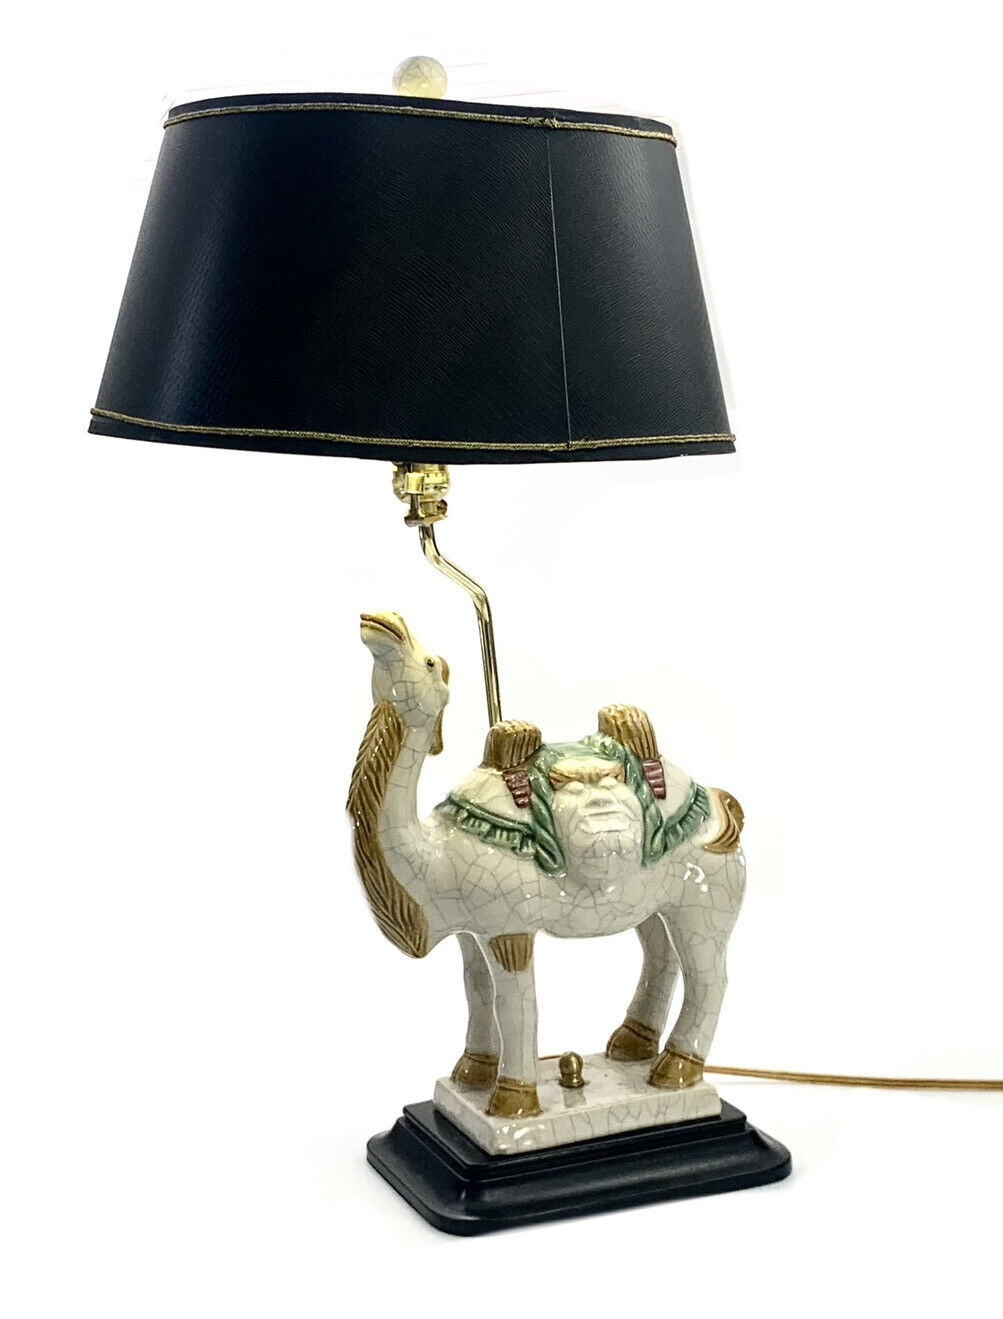 Lamp Camel Vintage Oriental Style Ceramic on Wooden Base with Nice Shade Decor